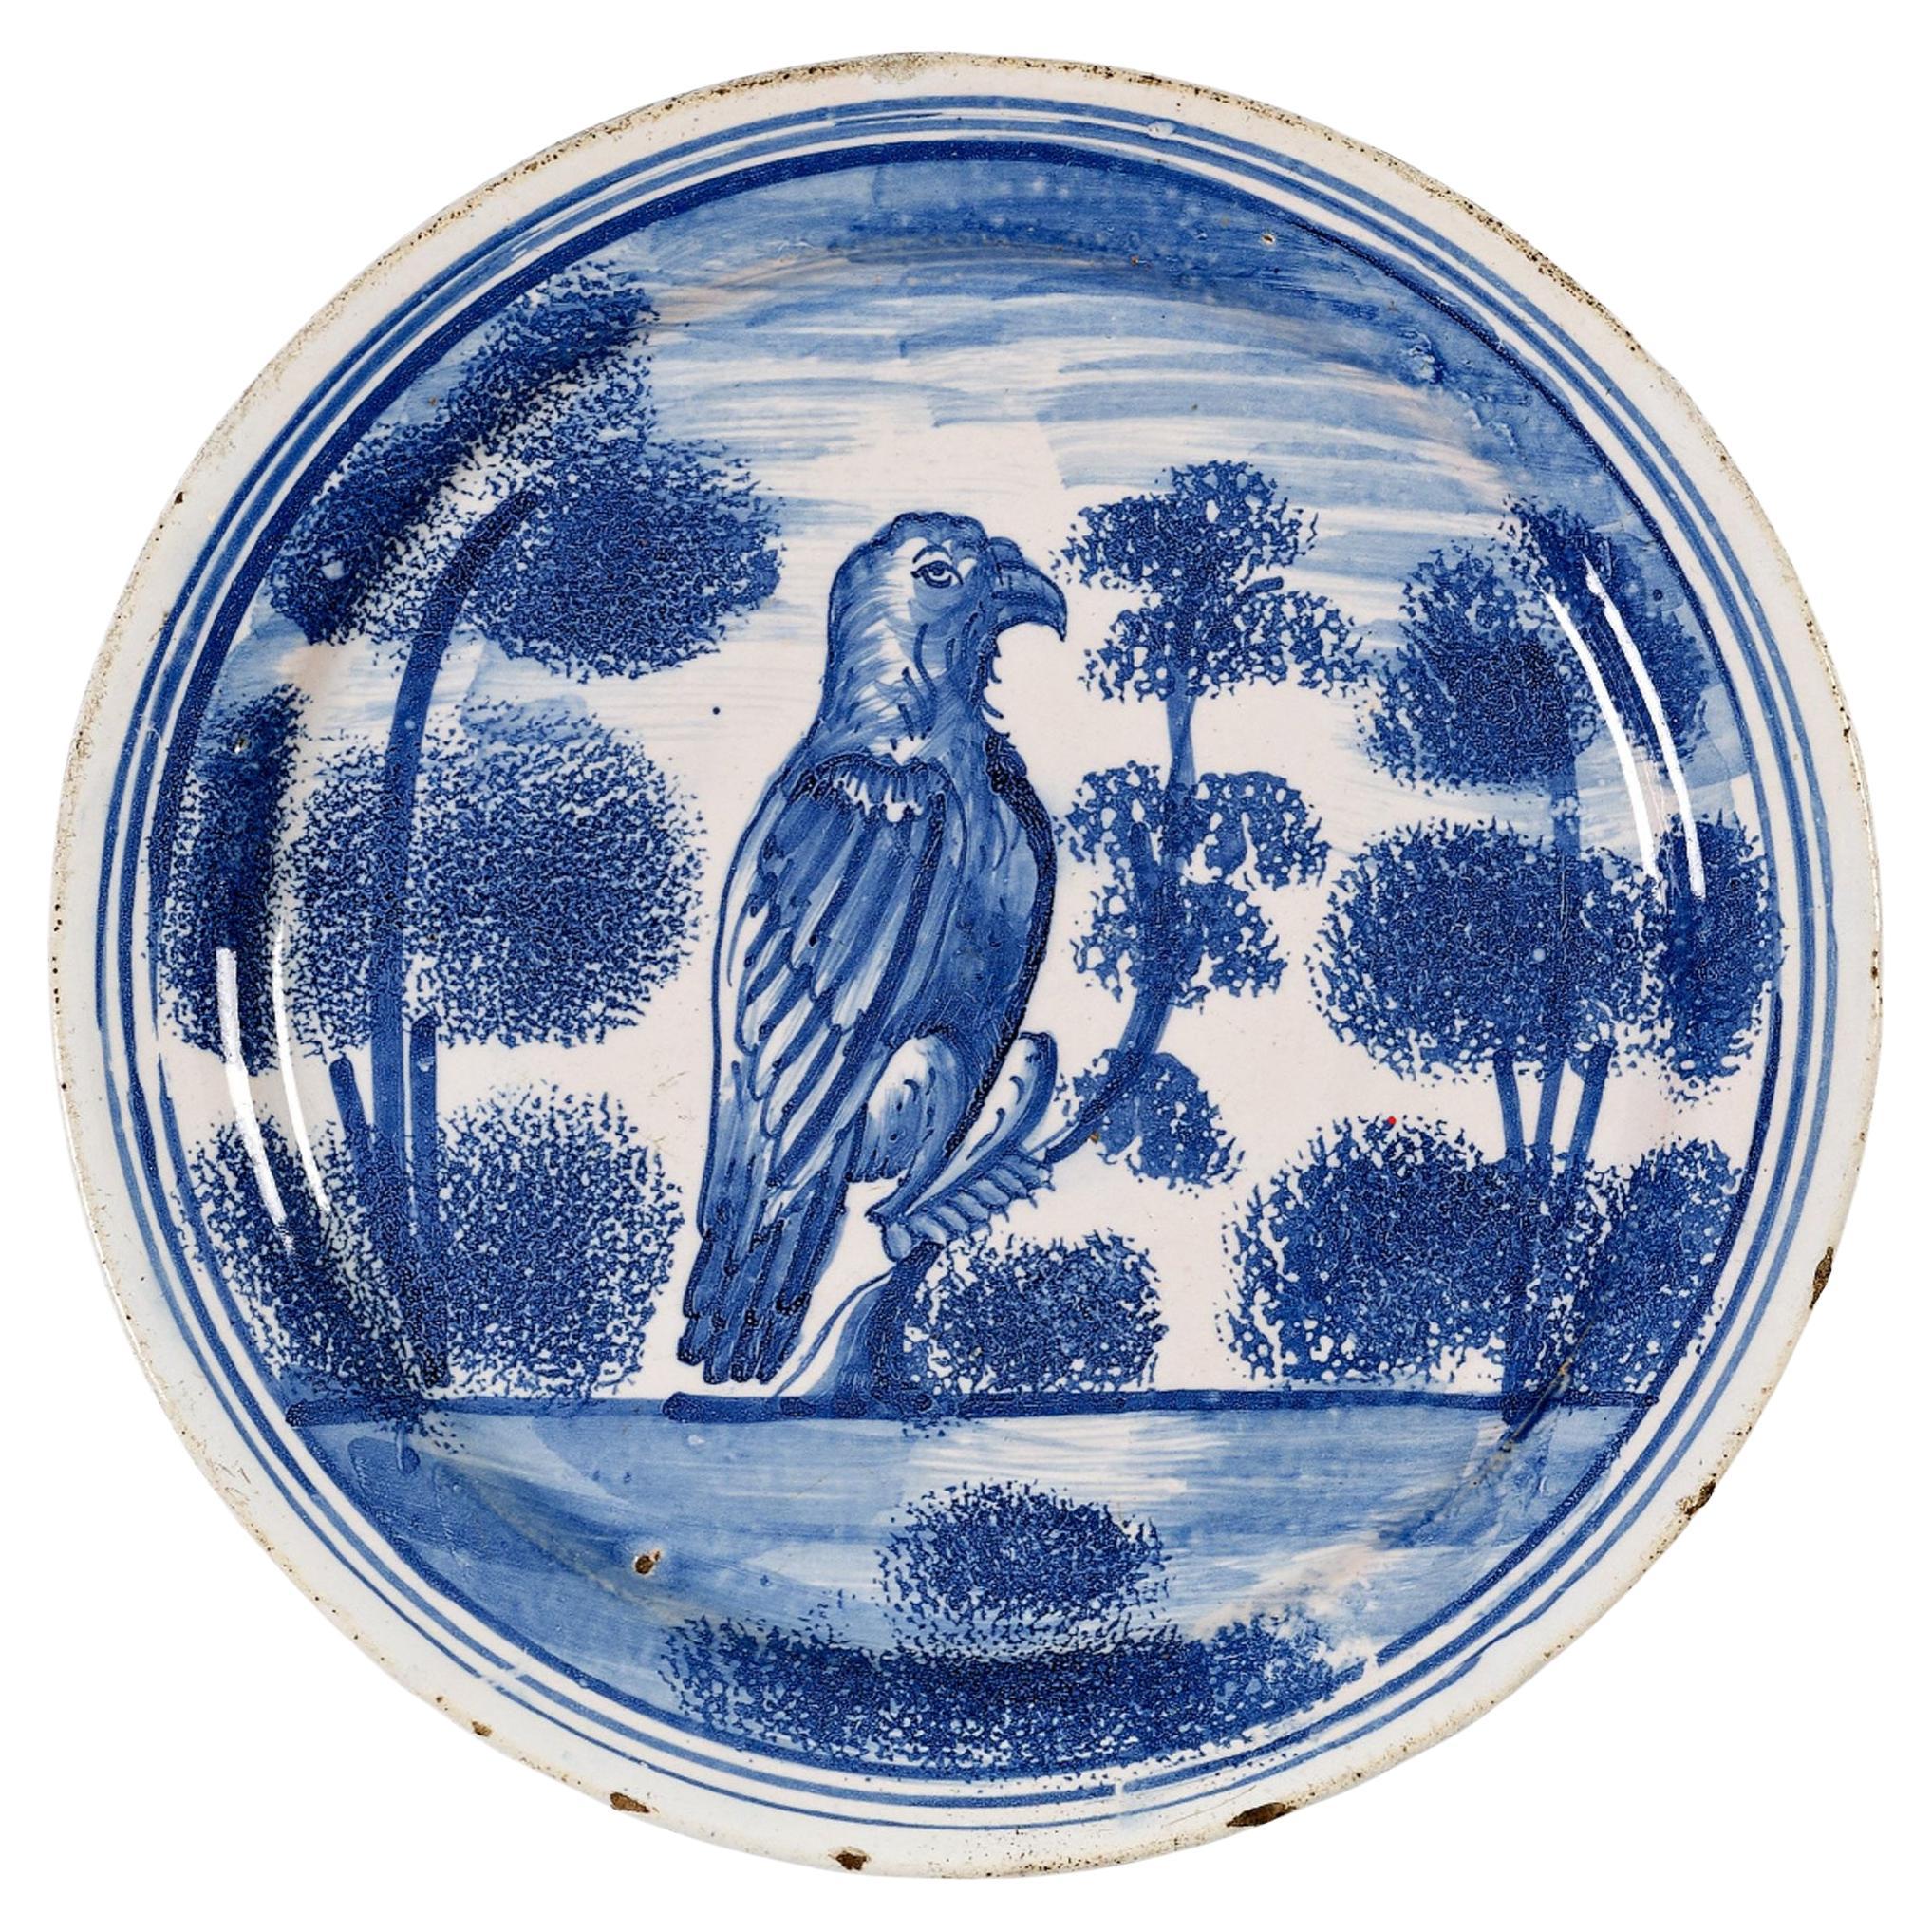 English Delftware Plate with Hawk Perched on Tree, London, Probably Vauxhall For Sale